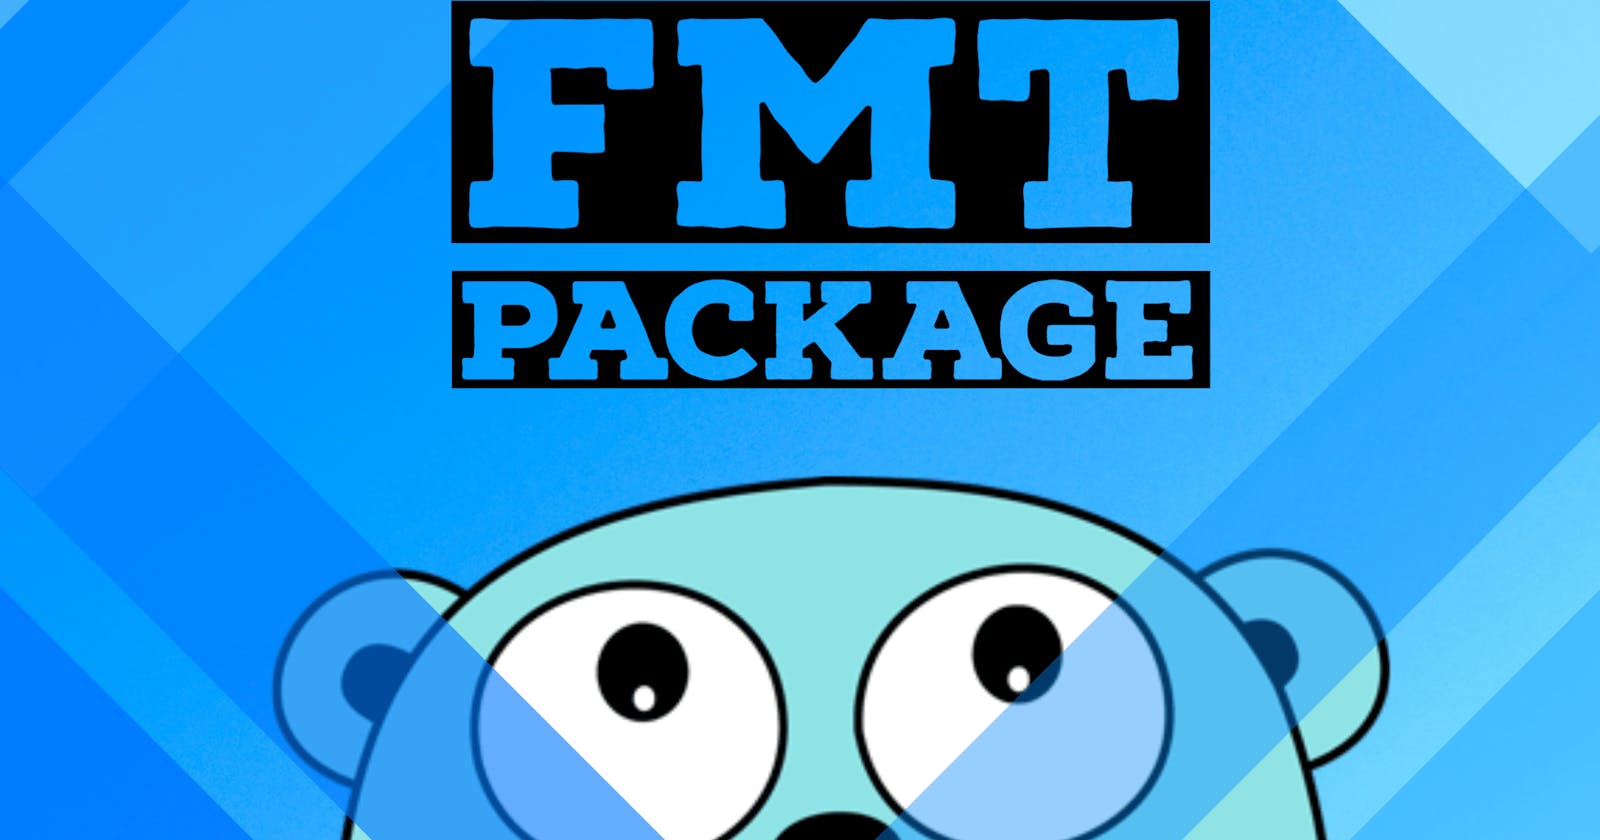 Go fmt Package